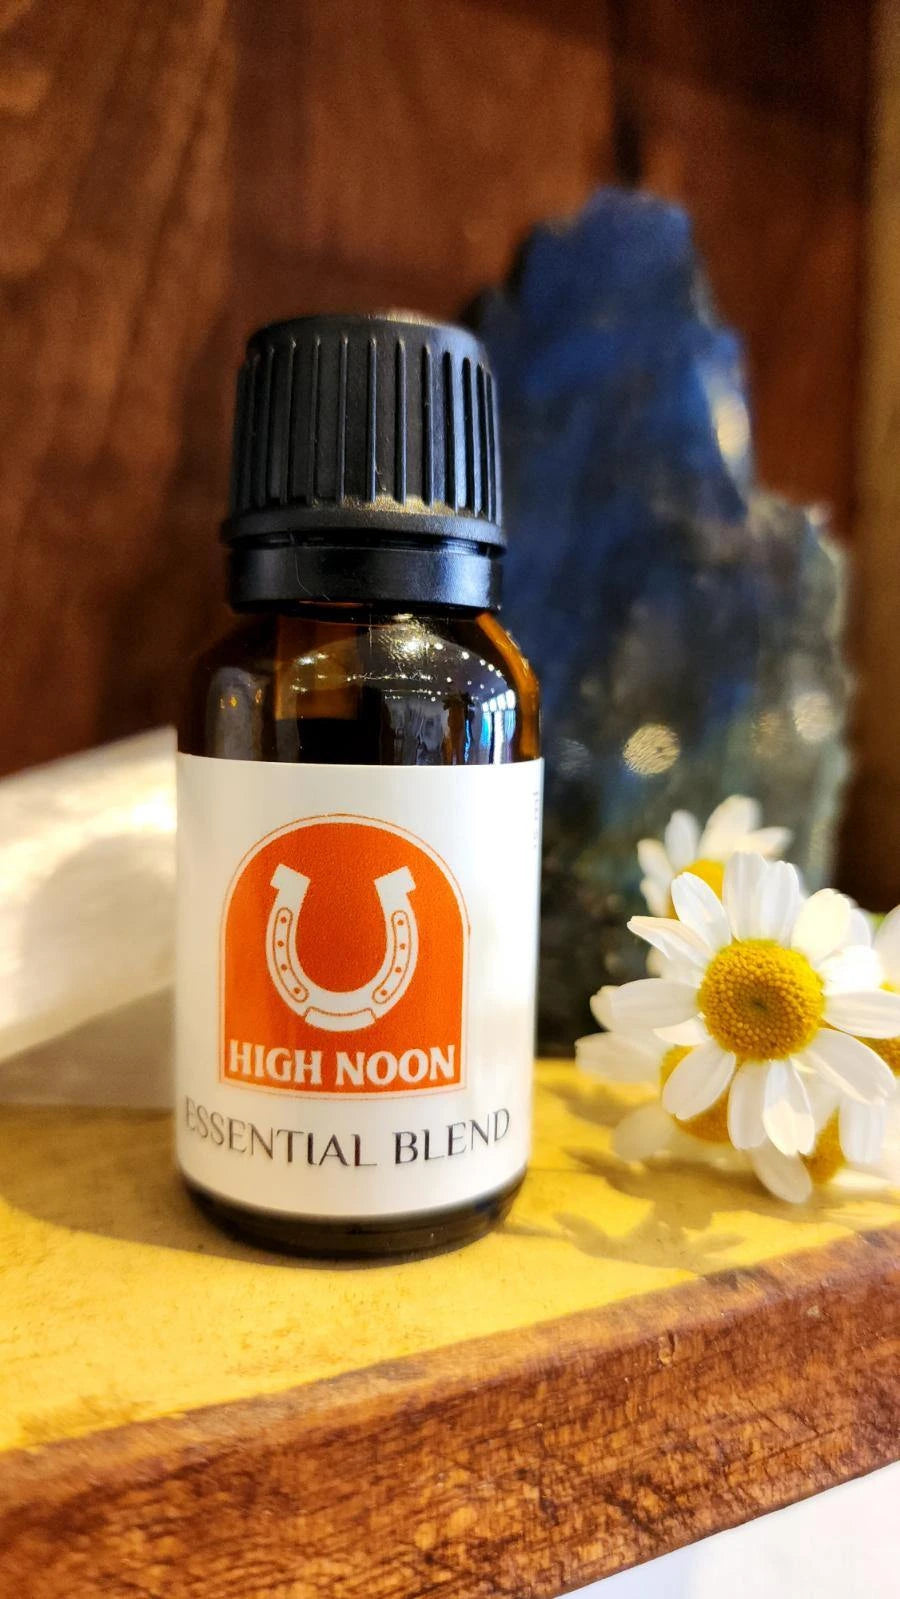 The High Noon Essential Oil Blend